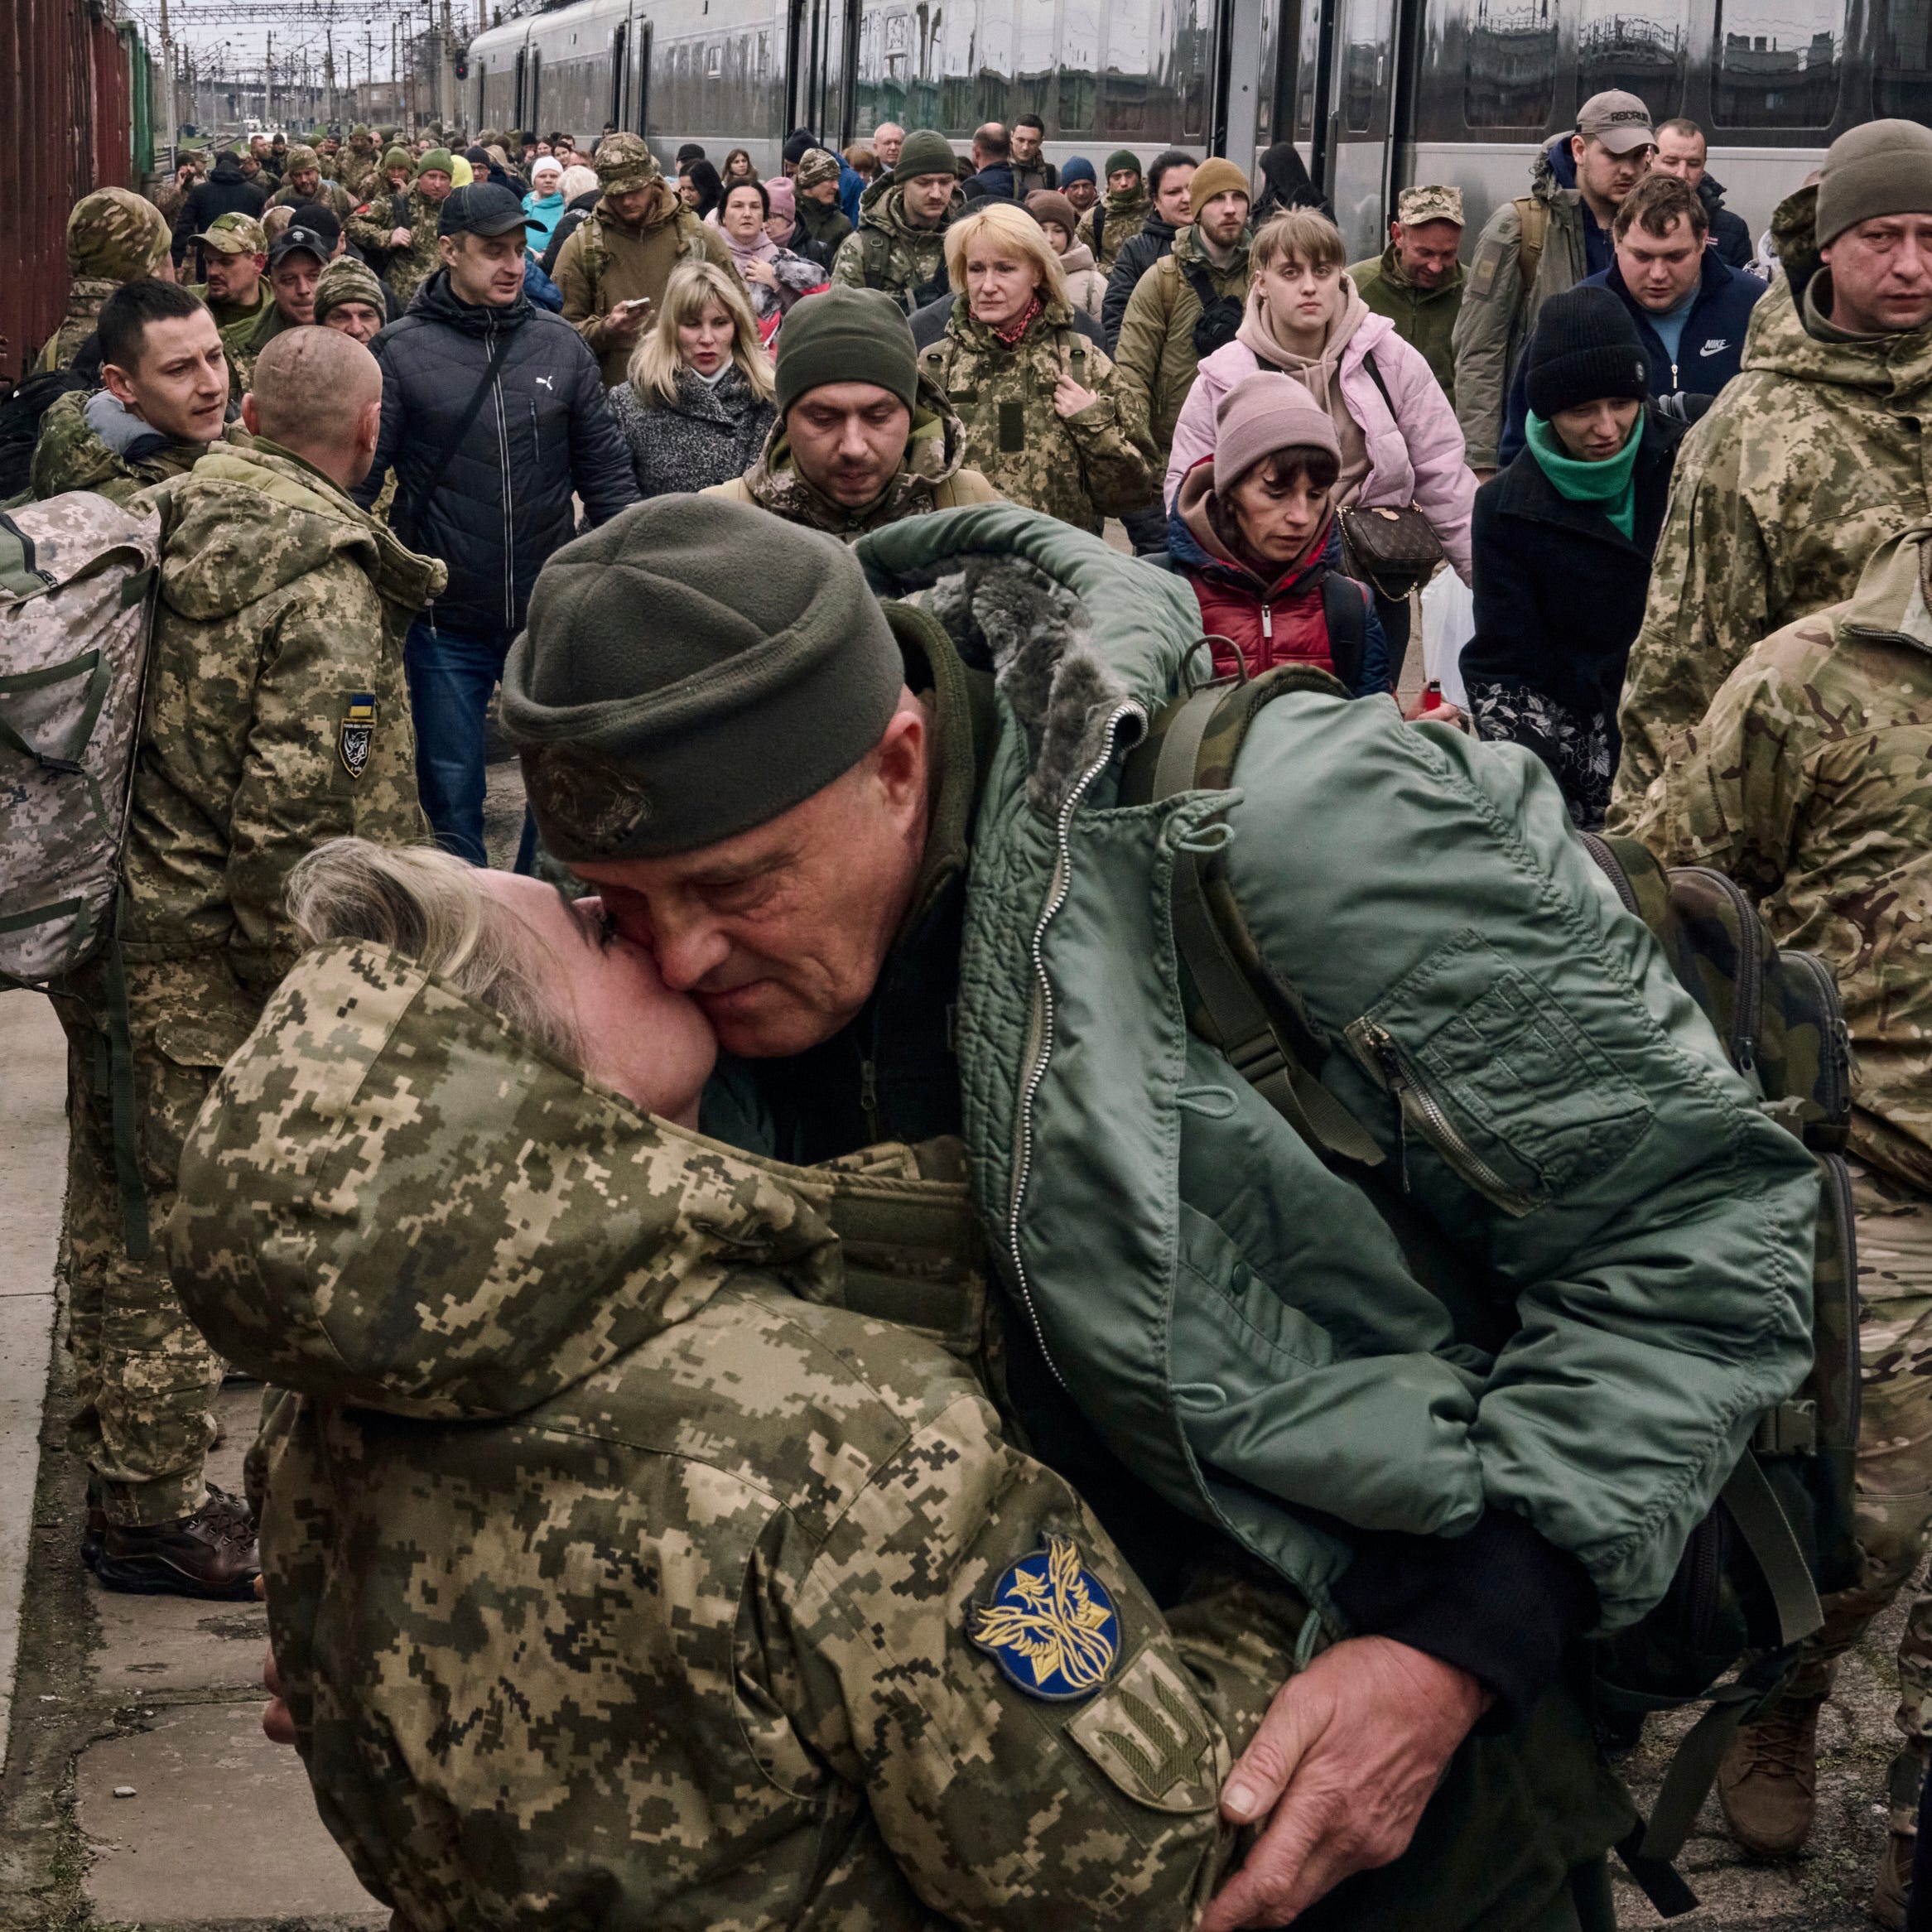 A Ukrainian woman soldier kisses her husband as they meet at a railway station close to the frontline in Kramatorsk, Donetsk region, Ukraine, Wednesday, March 29, 2023.